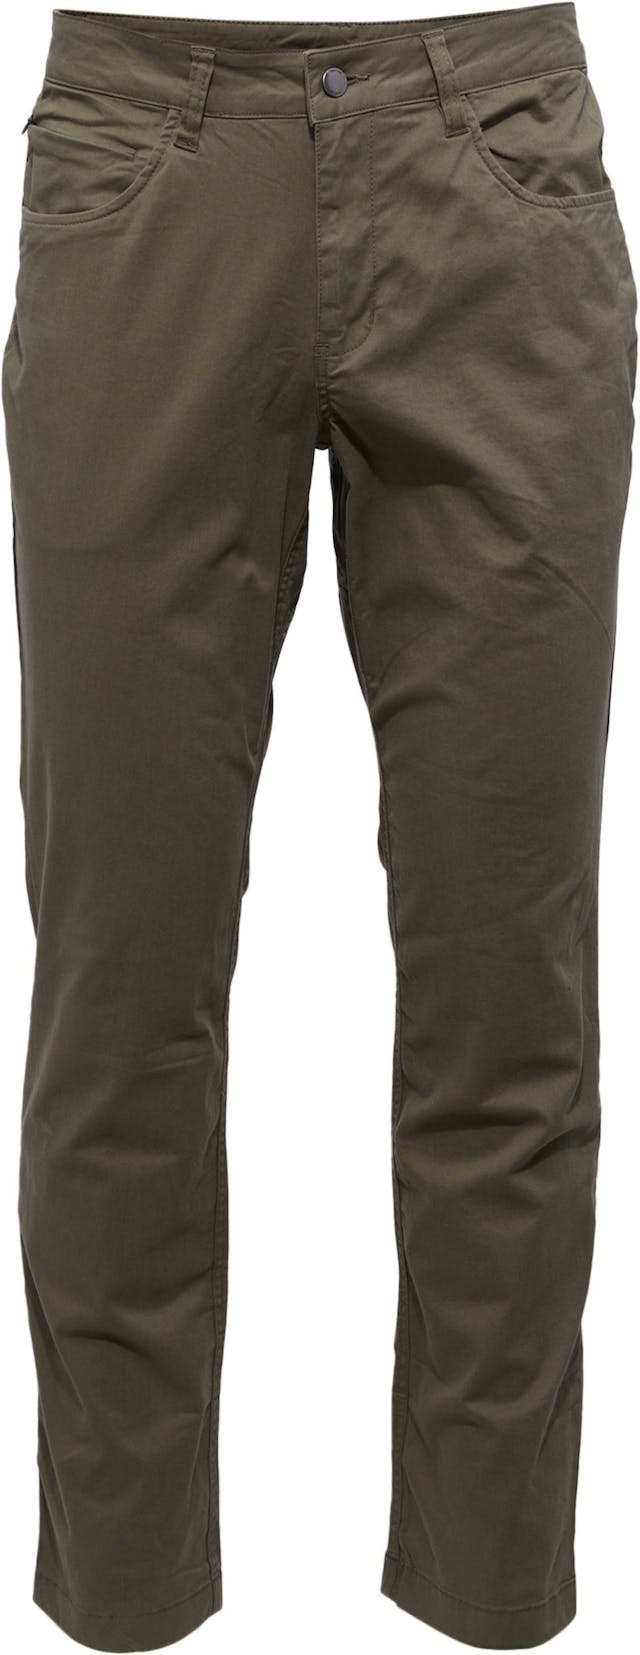 Product image for Everywhere Stretch Twill Pant - Men's